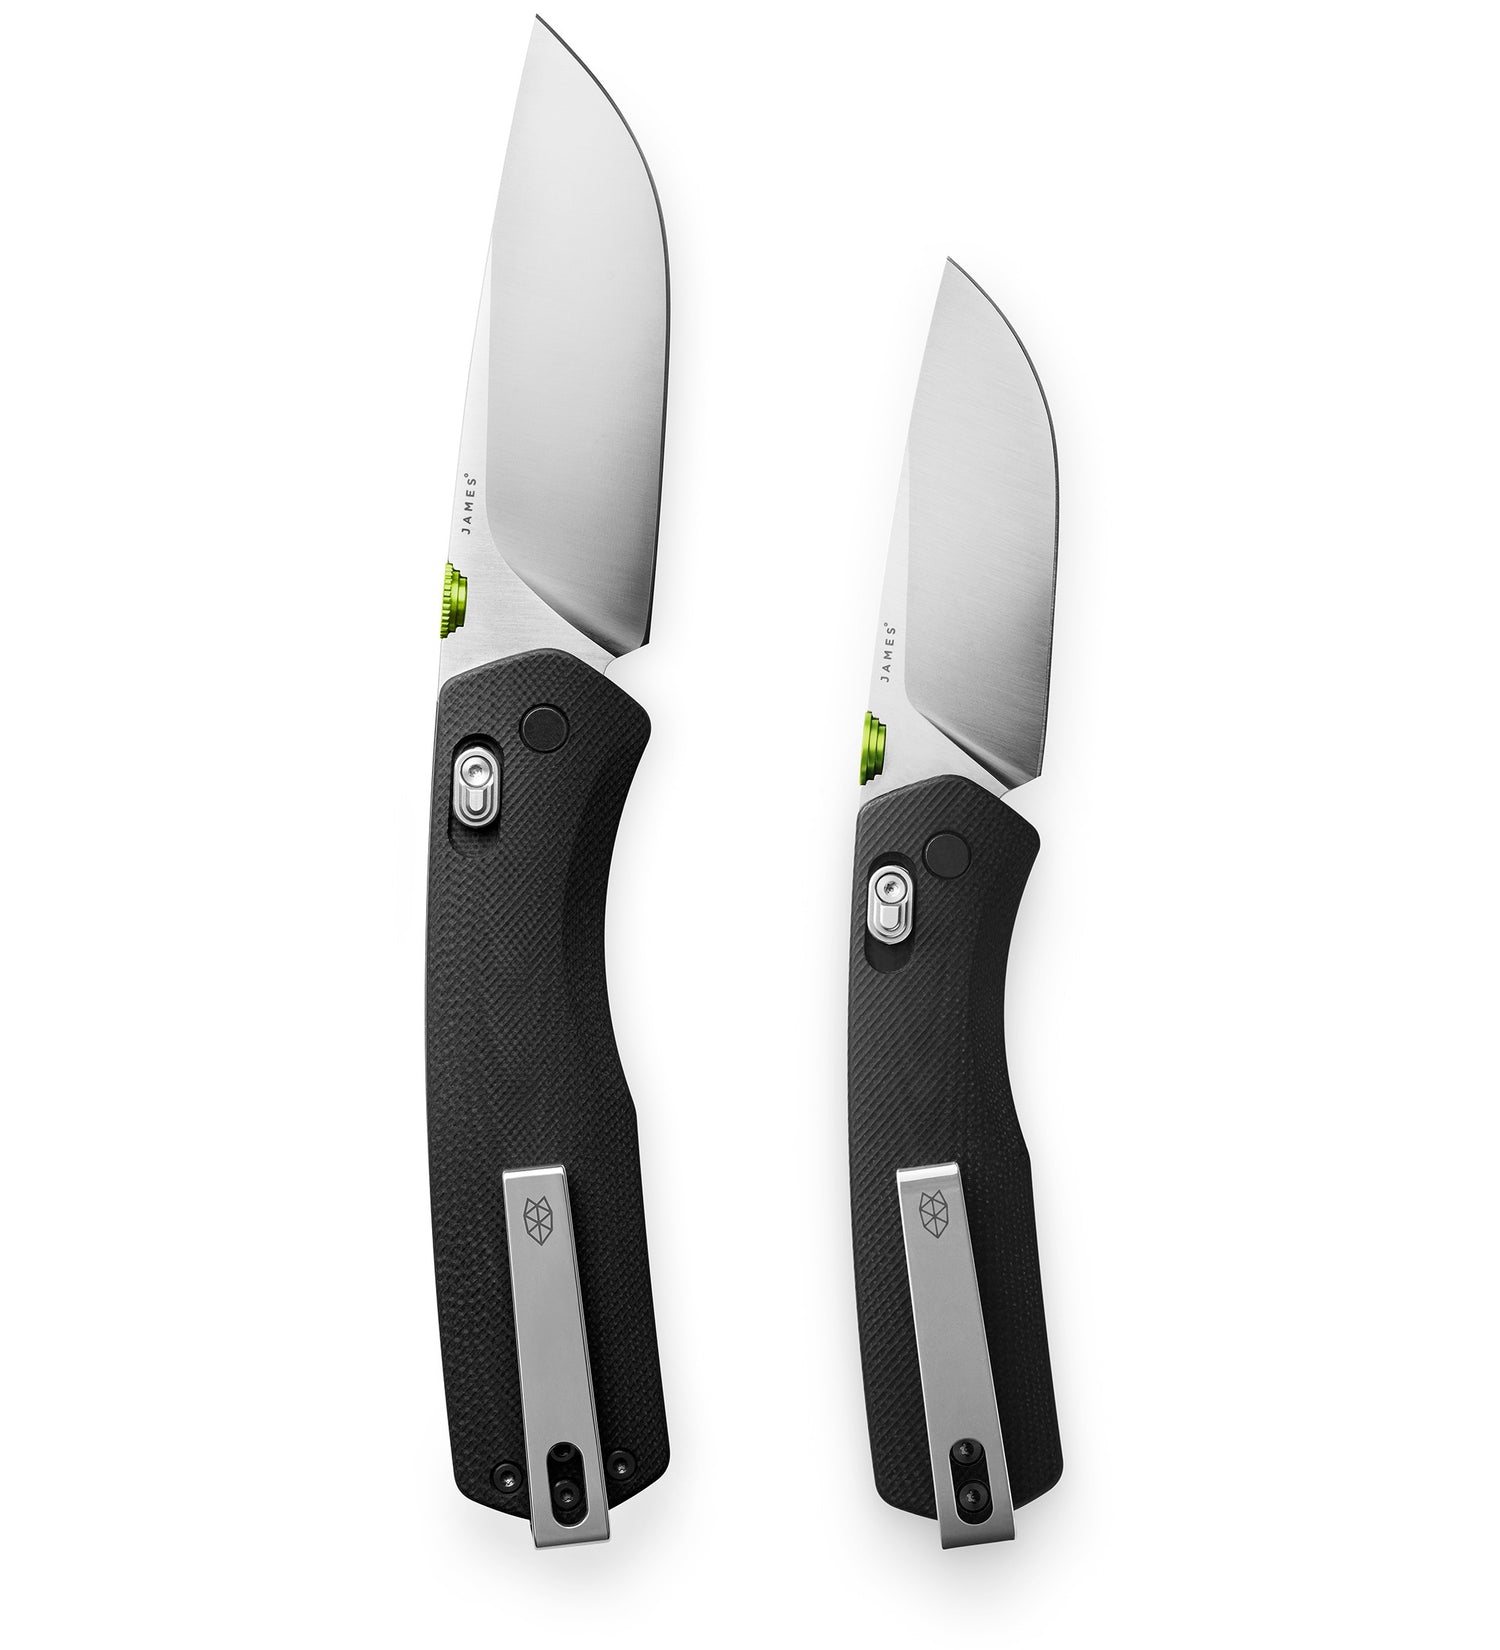 The Carter and Carter XL vertical with blades open